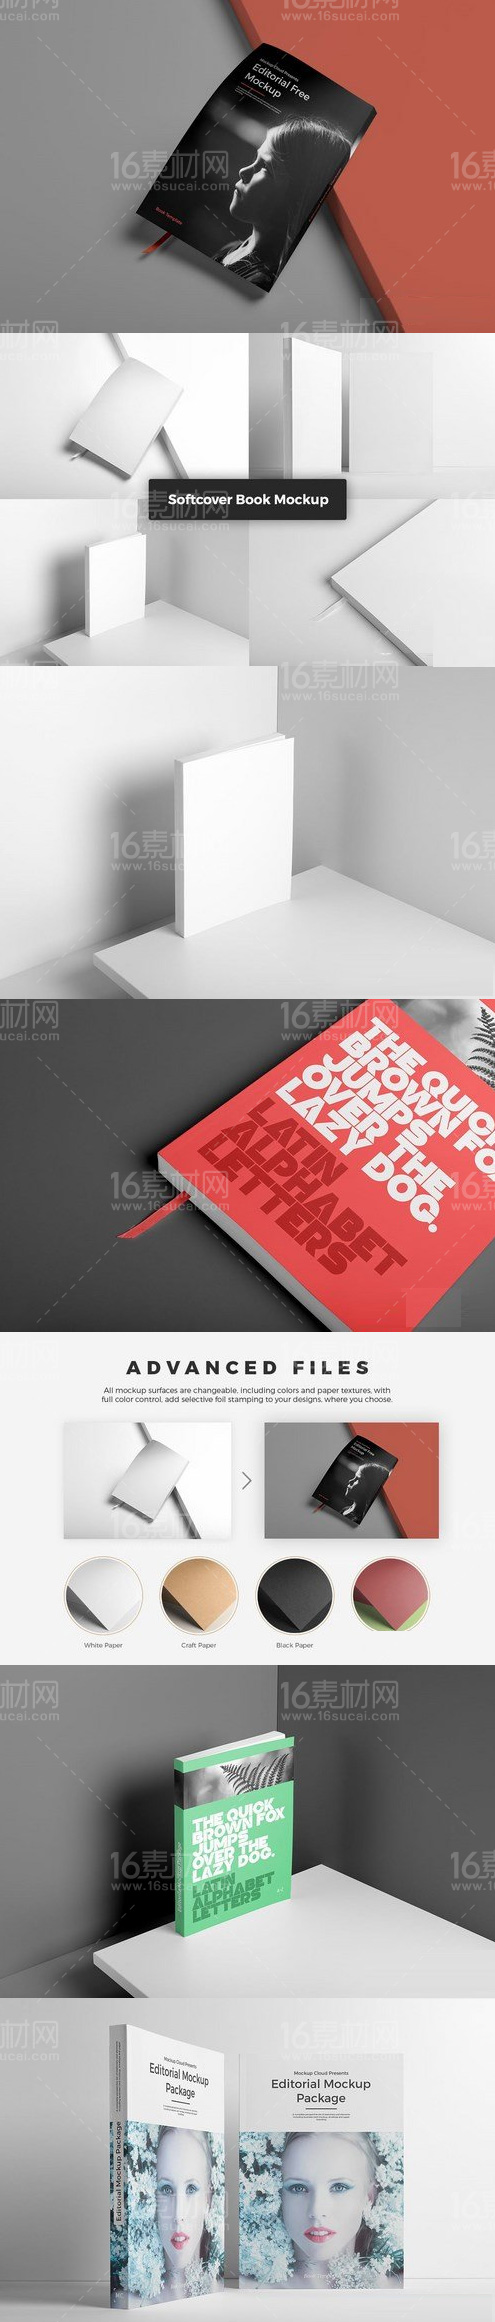 Softcover-Book-Mockup-»-Vector,-Photoshop-PSDAfter.jpg